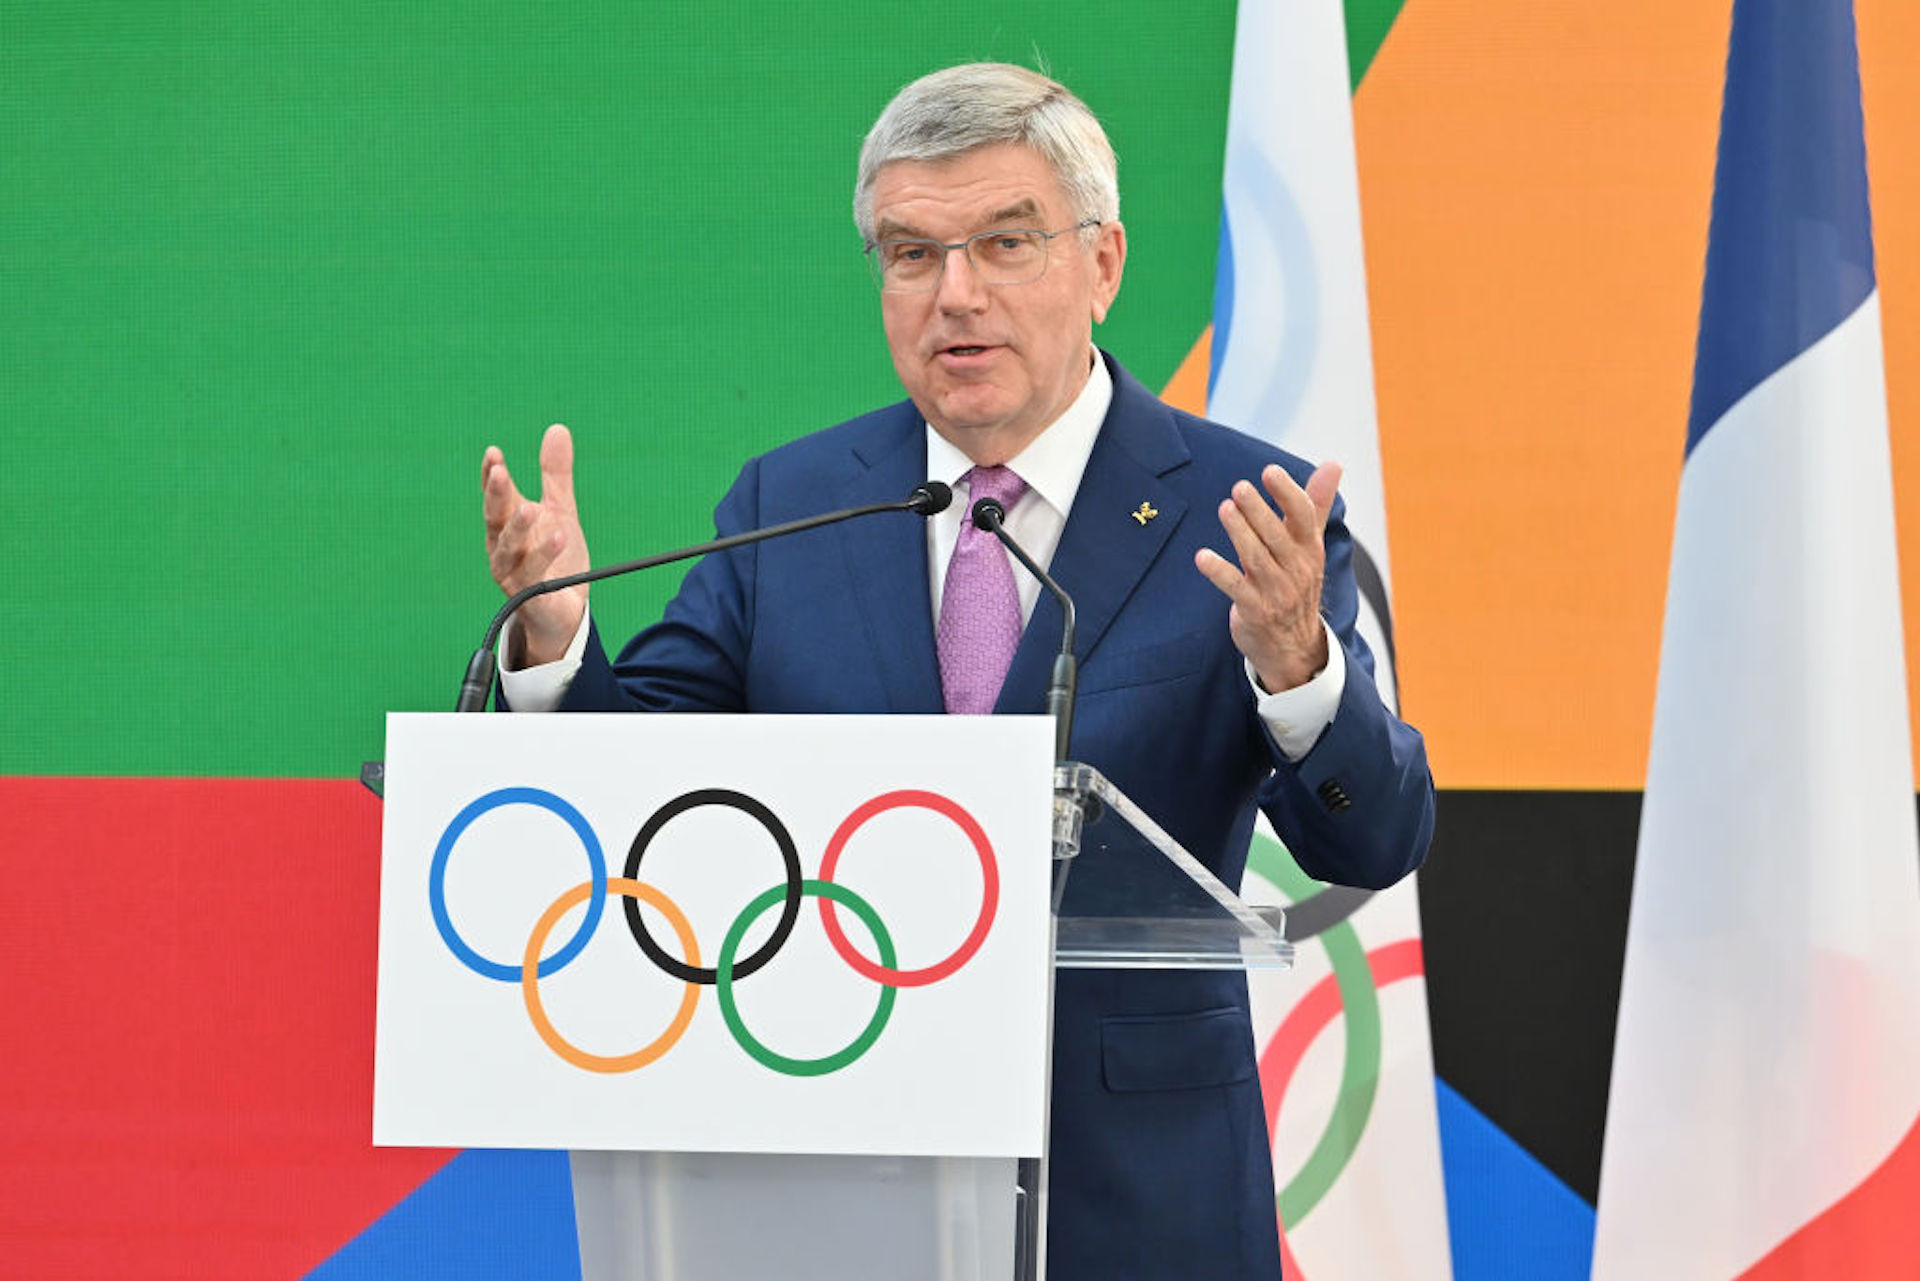 IOC President welcomes NOC of Palestine to Olympic House